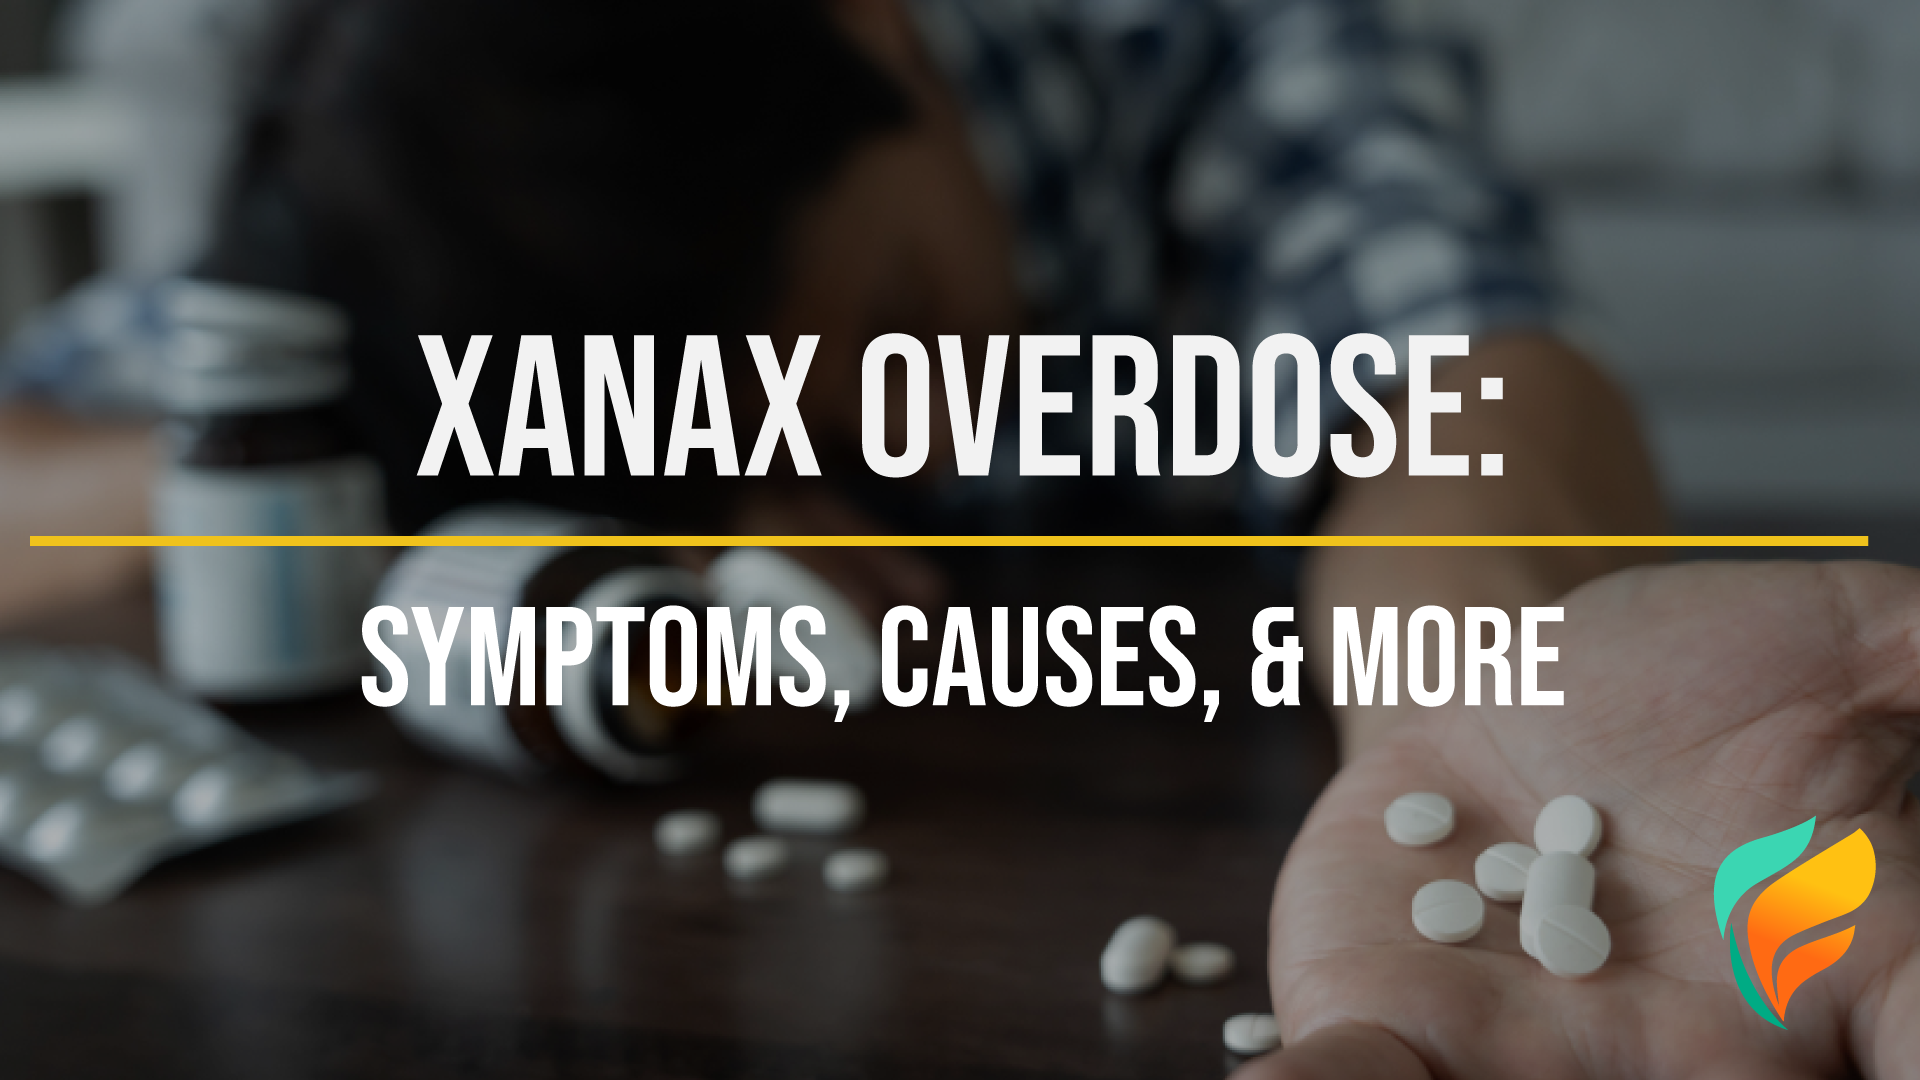 What Happens When You Overdose on Xanax?